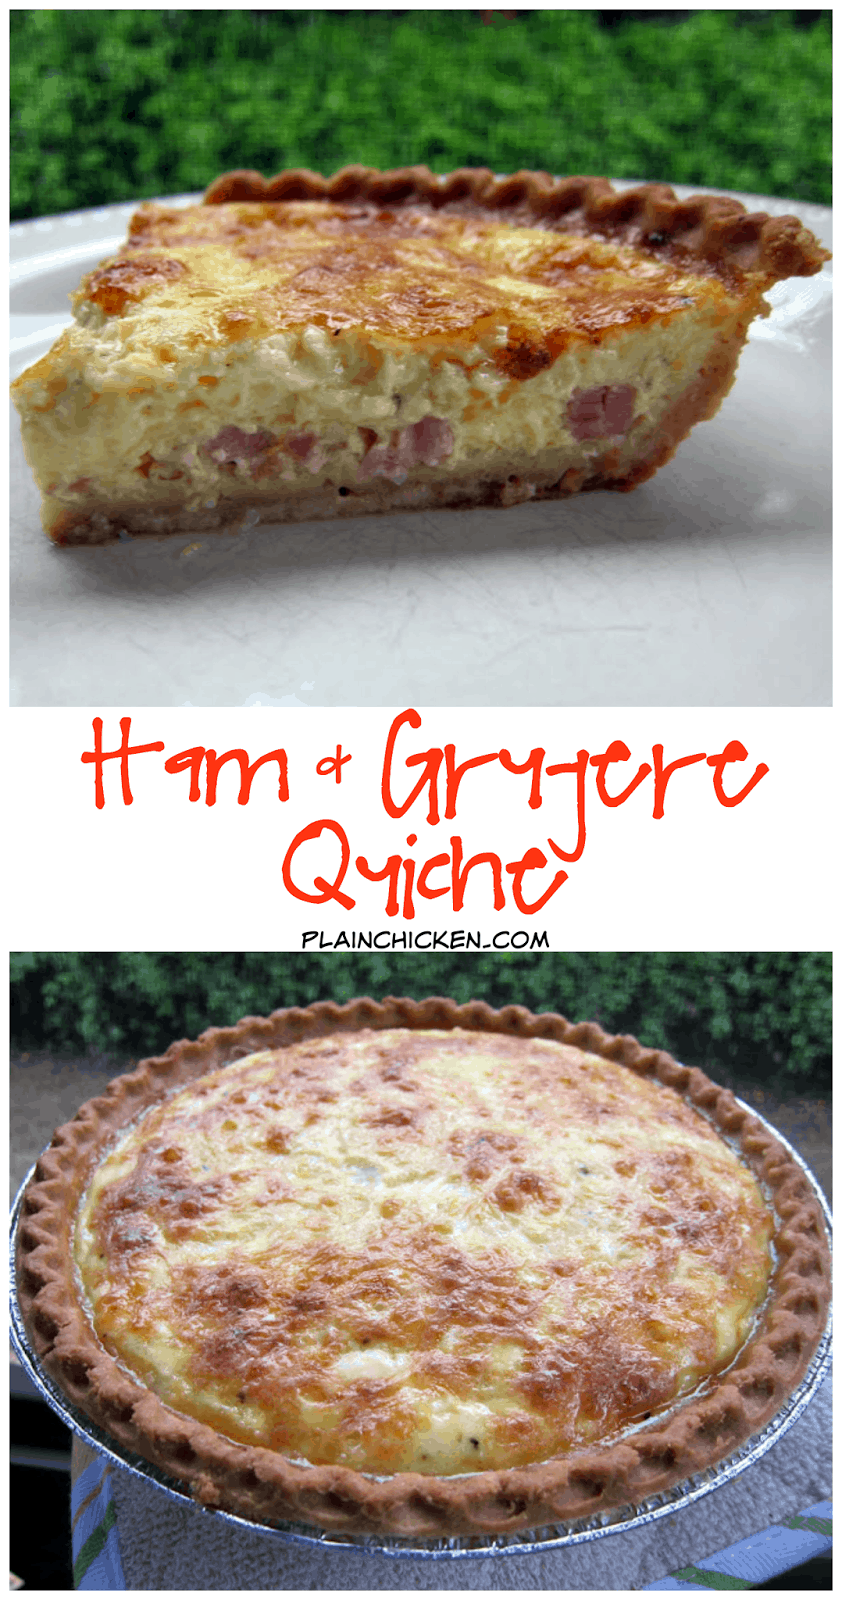 Ham and Gruyere Quiche - eggs, milk, sour cream ham, gruyere cheese - can assemble & freeze for later! SO good! We love it for breakfast, lunch or dinner. 